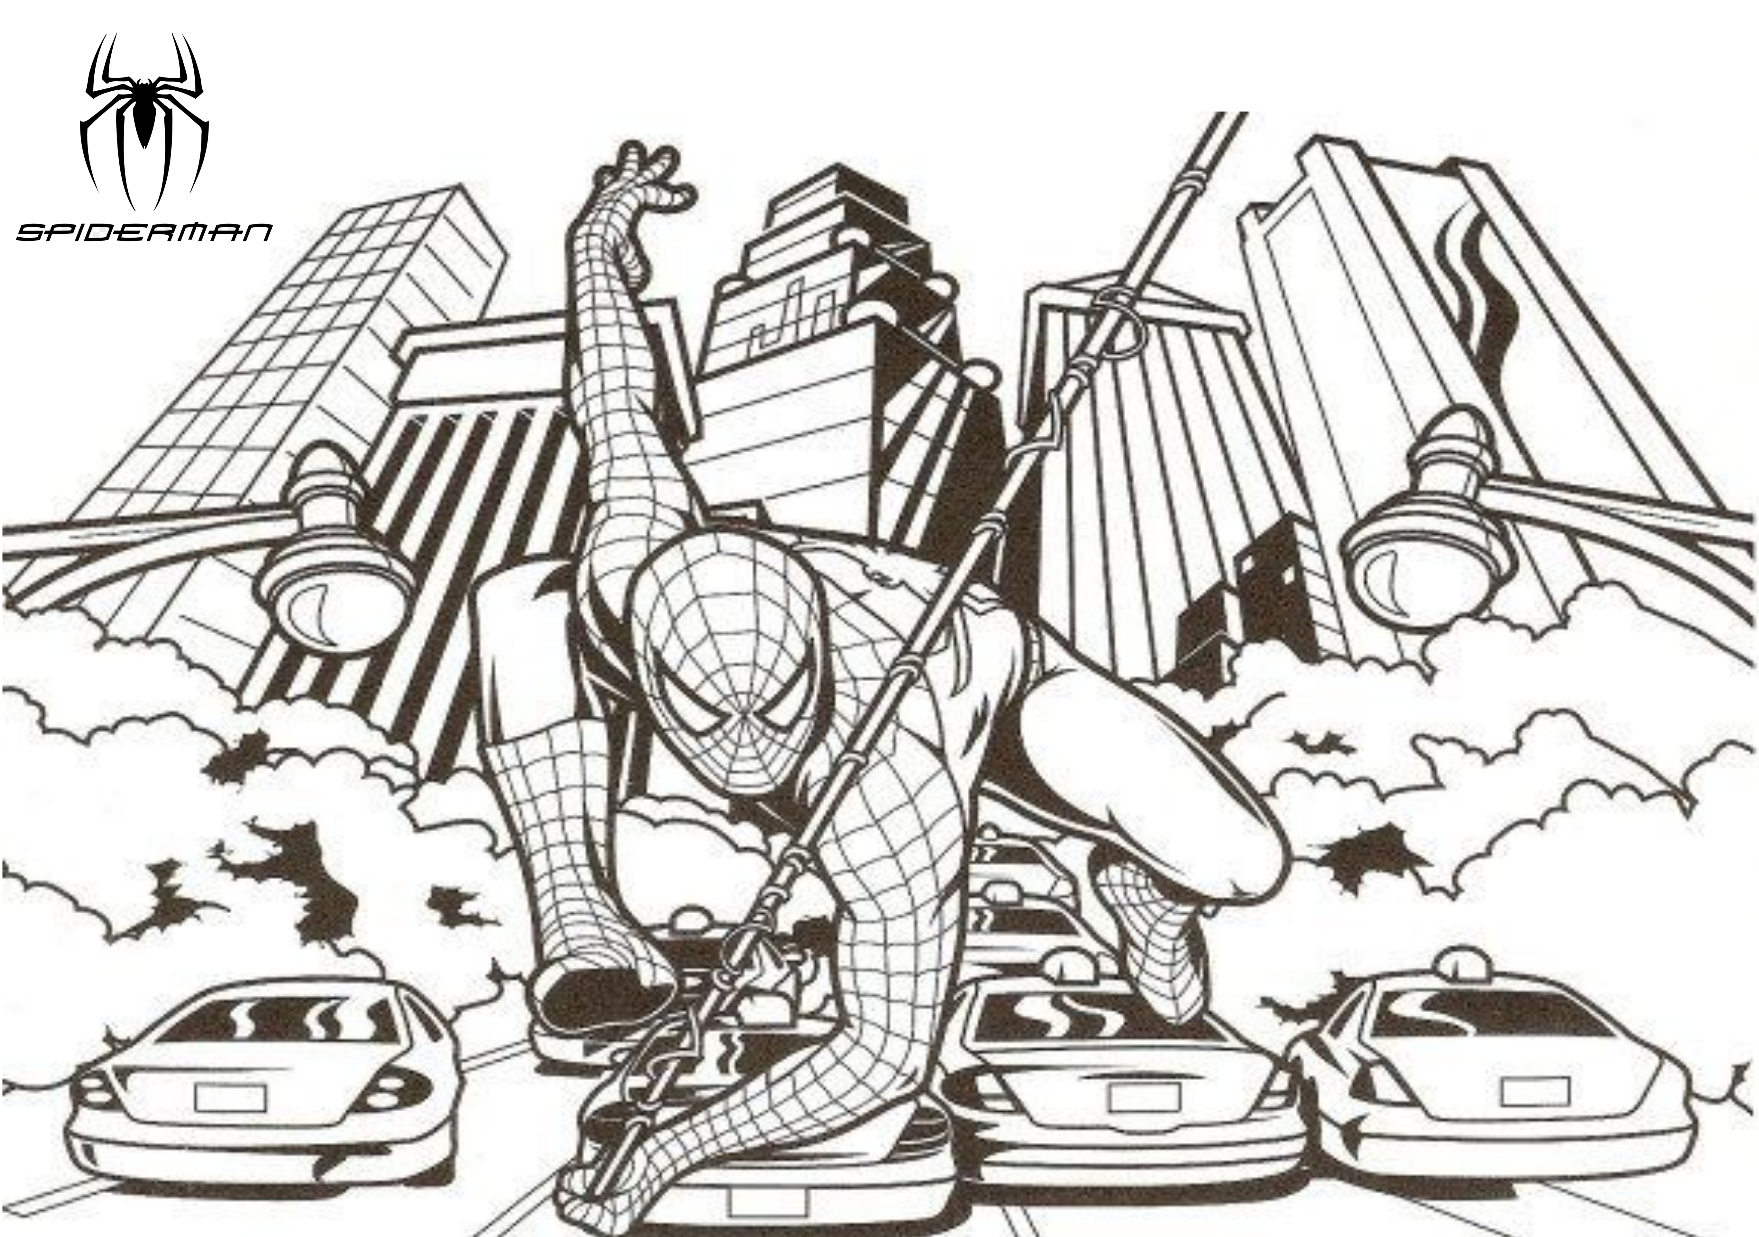 Spider man swinging through the streets of New York City, printable coloring page.